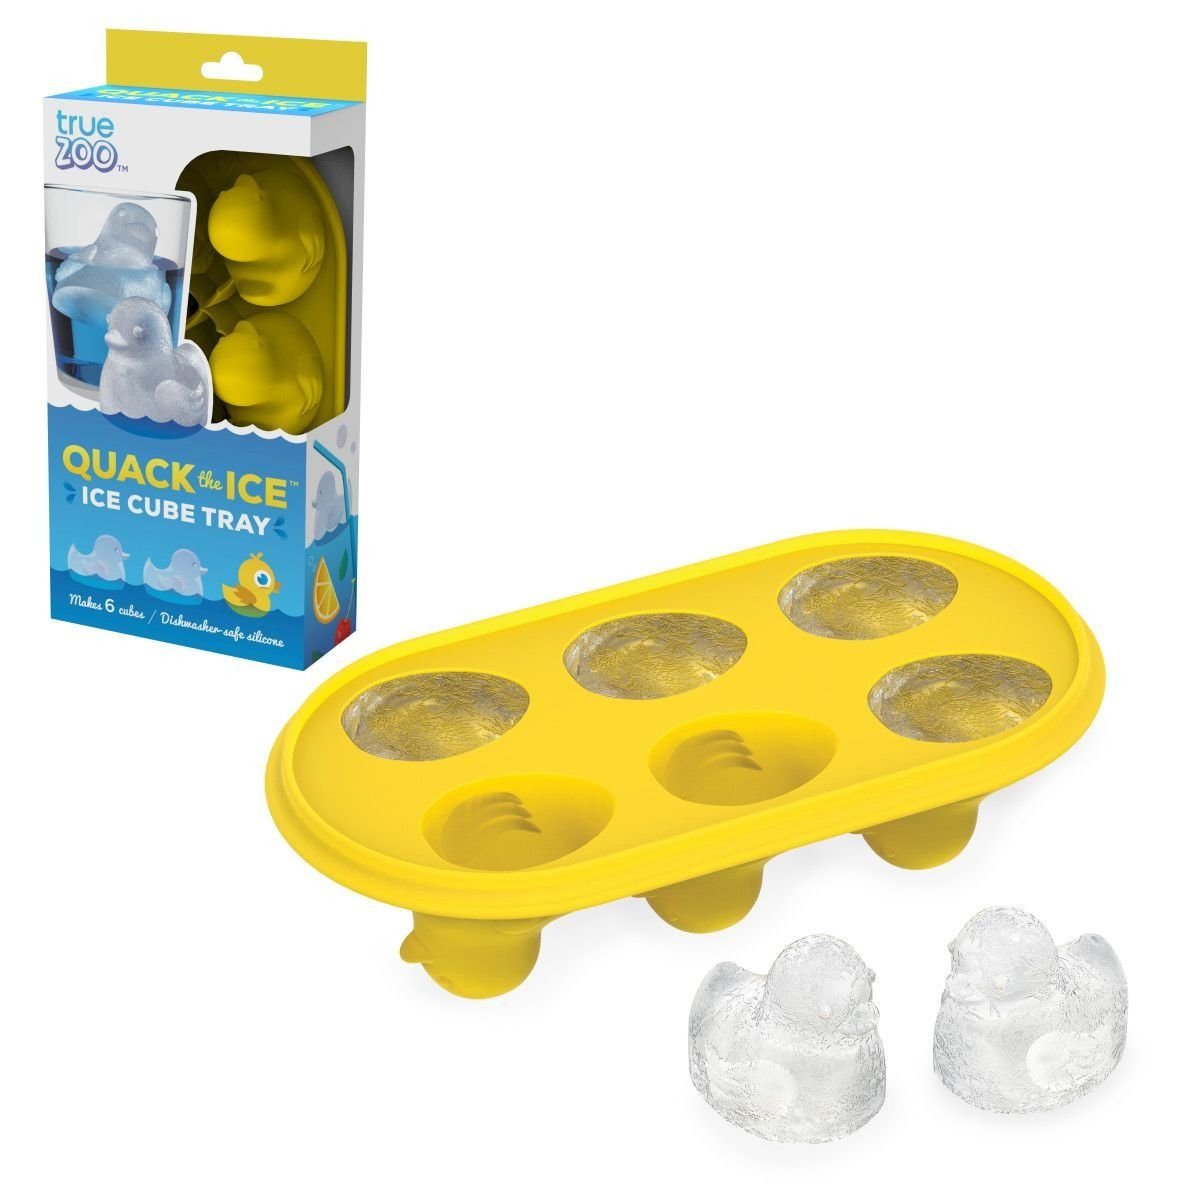 True Sphere Ice Tray, Dishwasher-safe Silicone Ice Mold, Makes 6